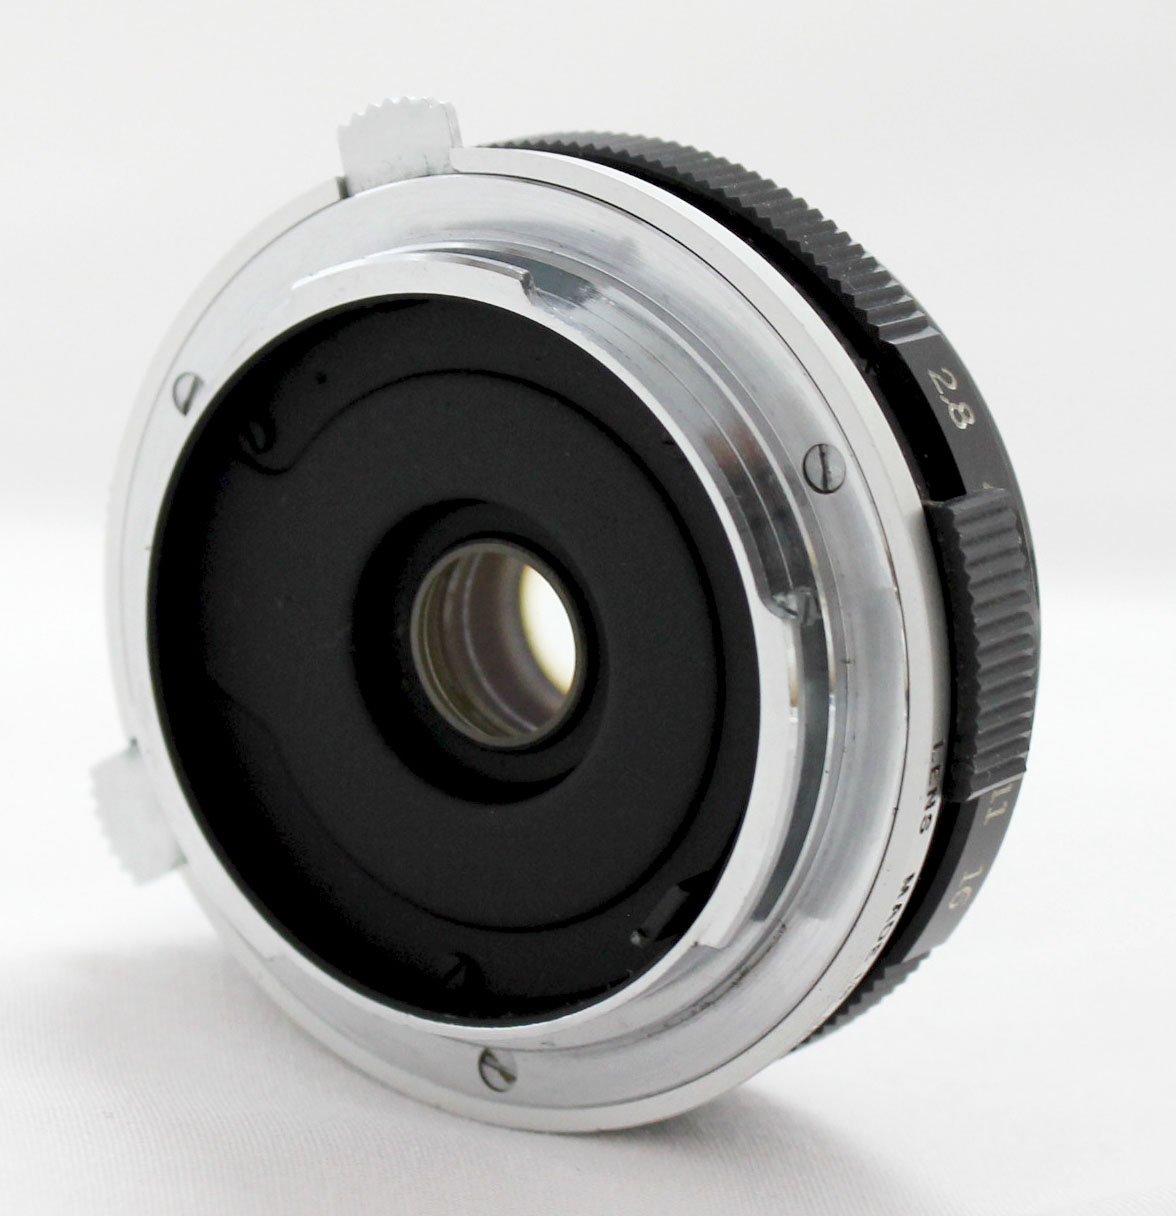 Olympus E.Zuiko Auto-S 38mm F/2.8 Pancake Lens for PEN F FT from 